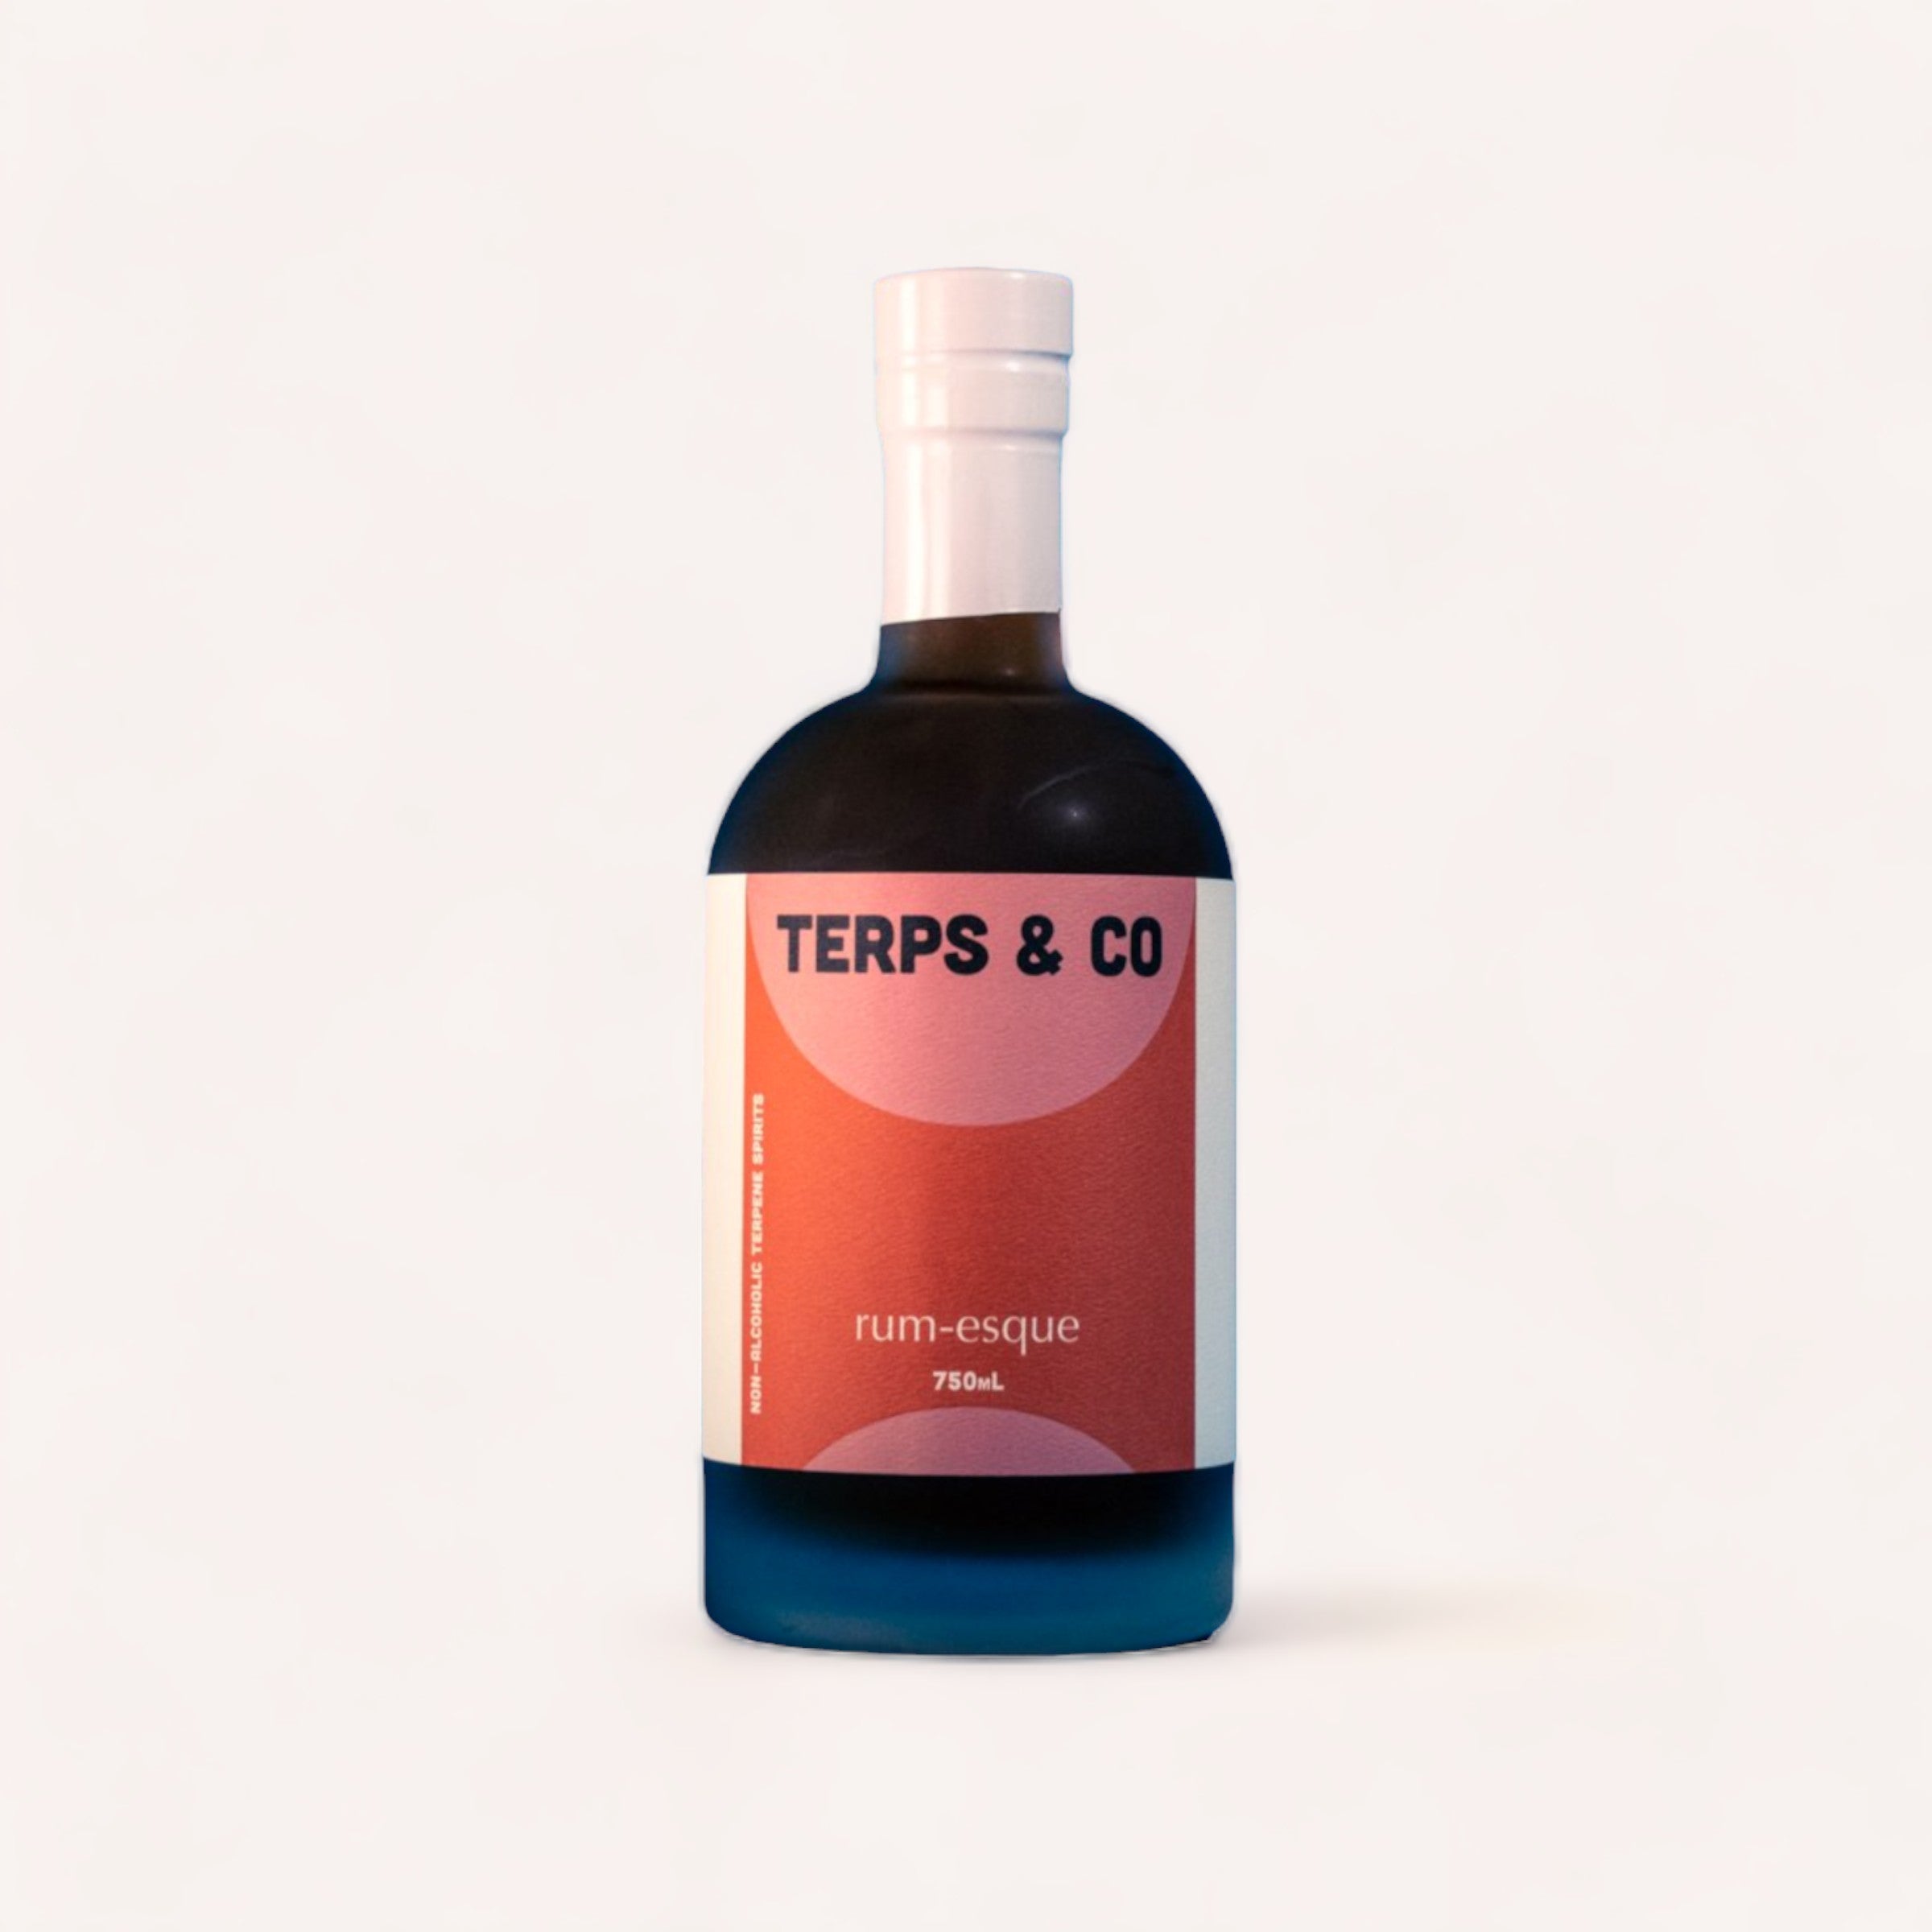 A sleek bottle of Rum-esque by Terps & Co zero alcohol spiced rum, 750ml, set against a clean white background.